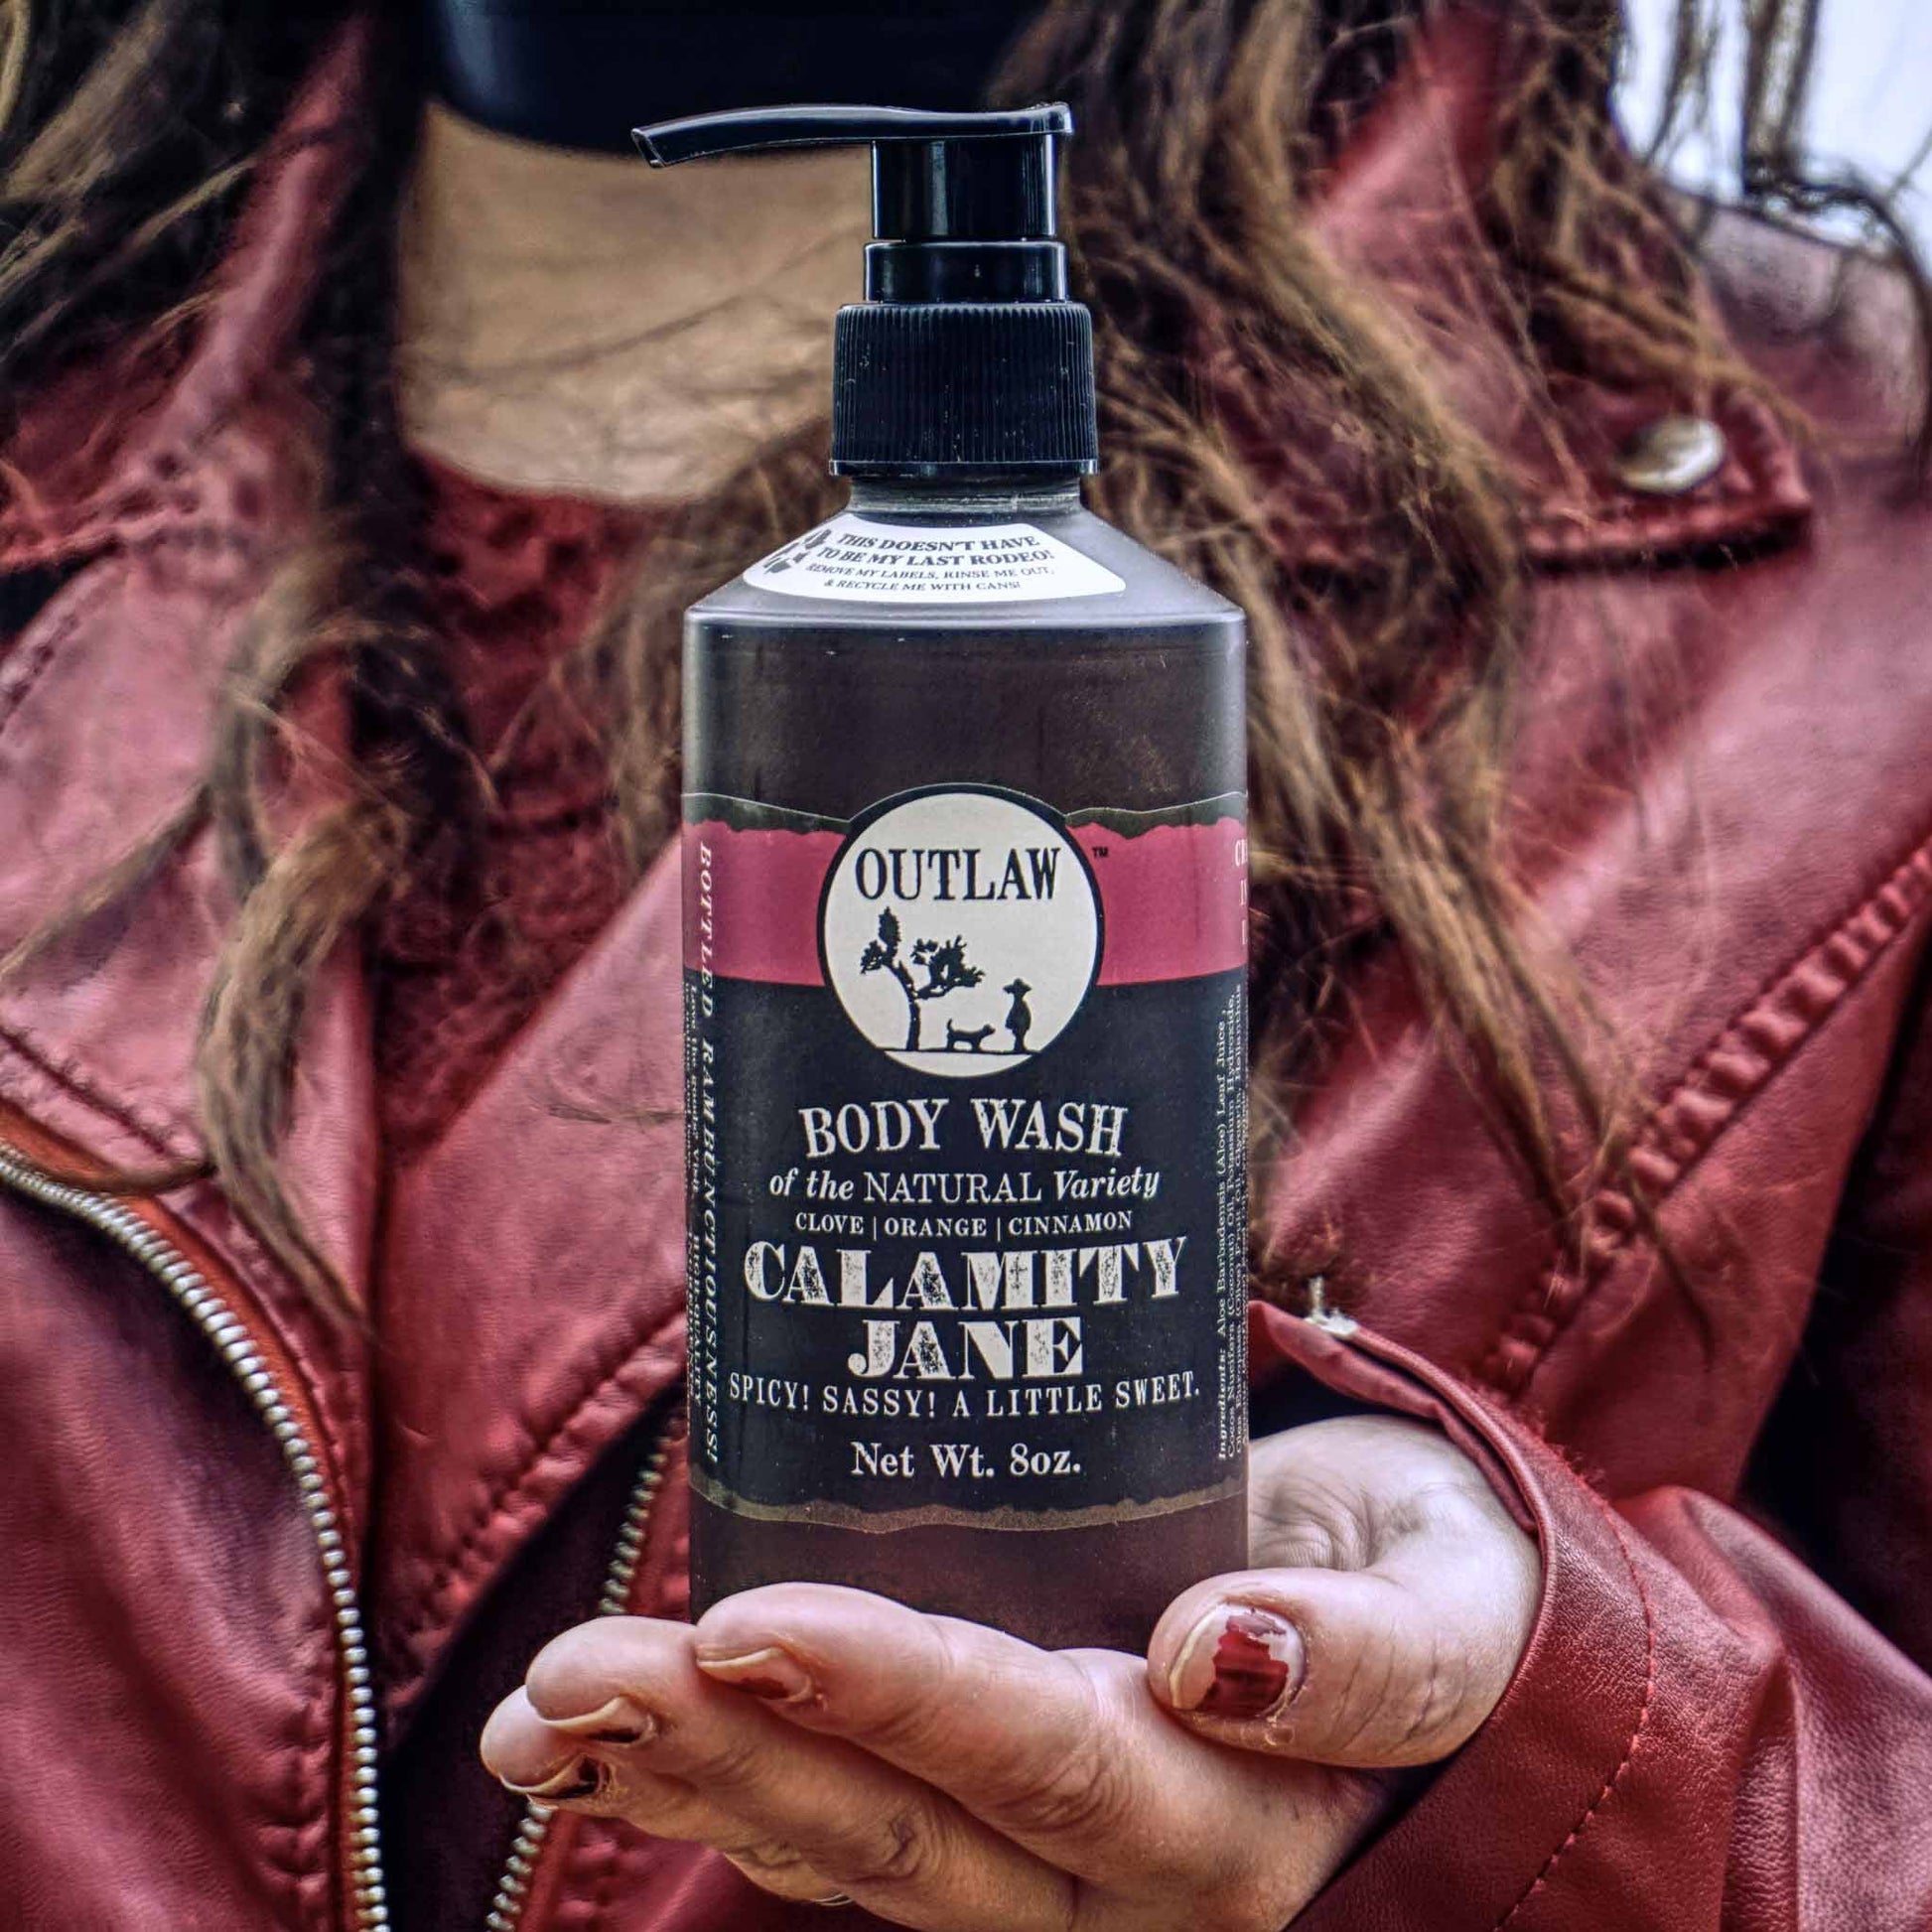 Natural body wash in Calamity Jane orange and cinnamon scent by Outlaw